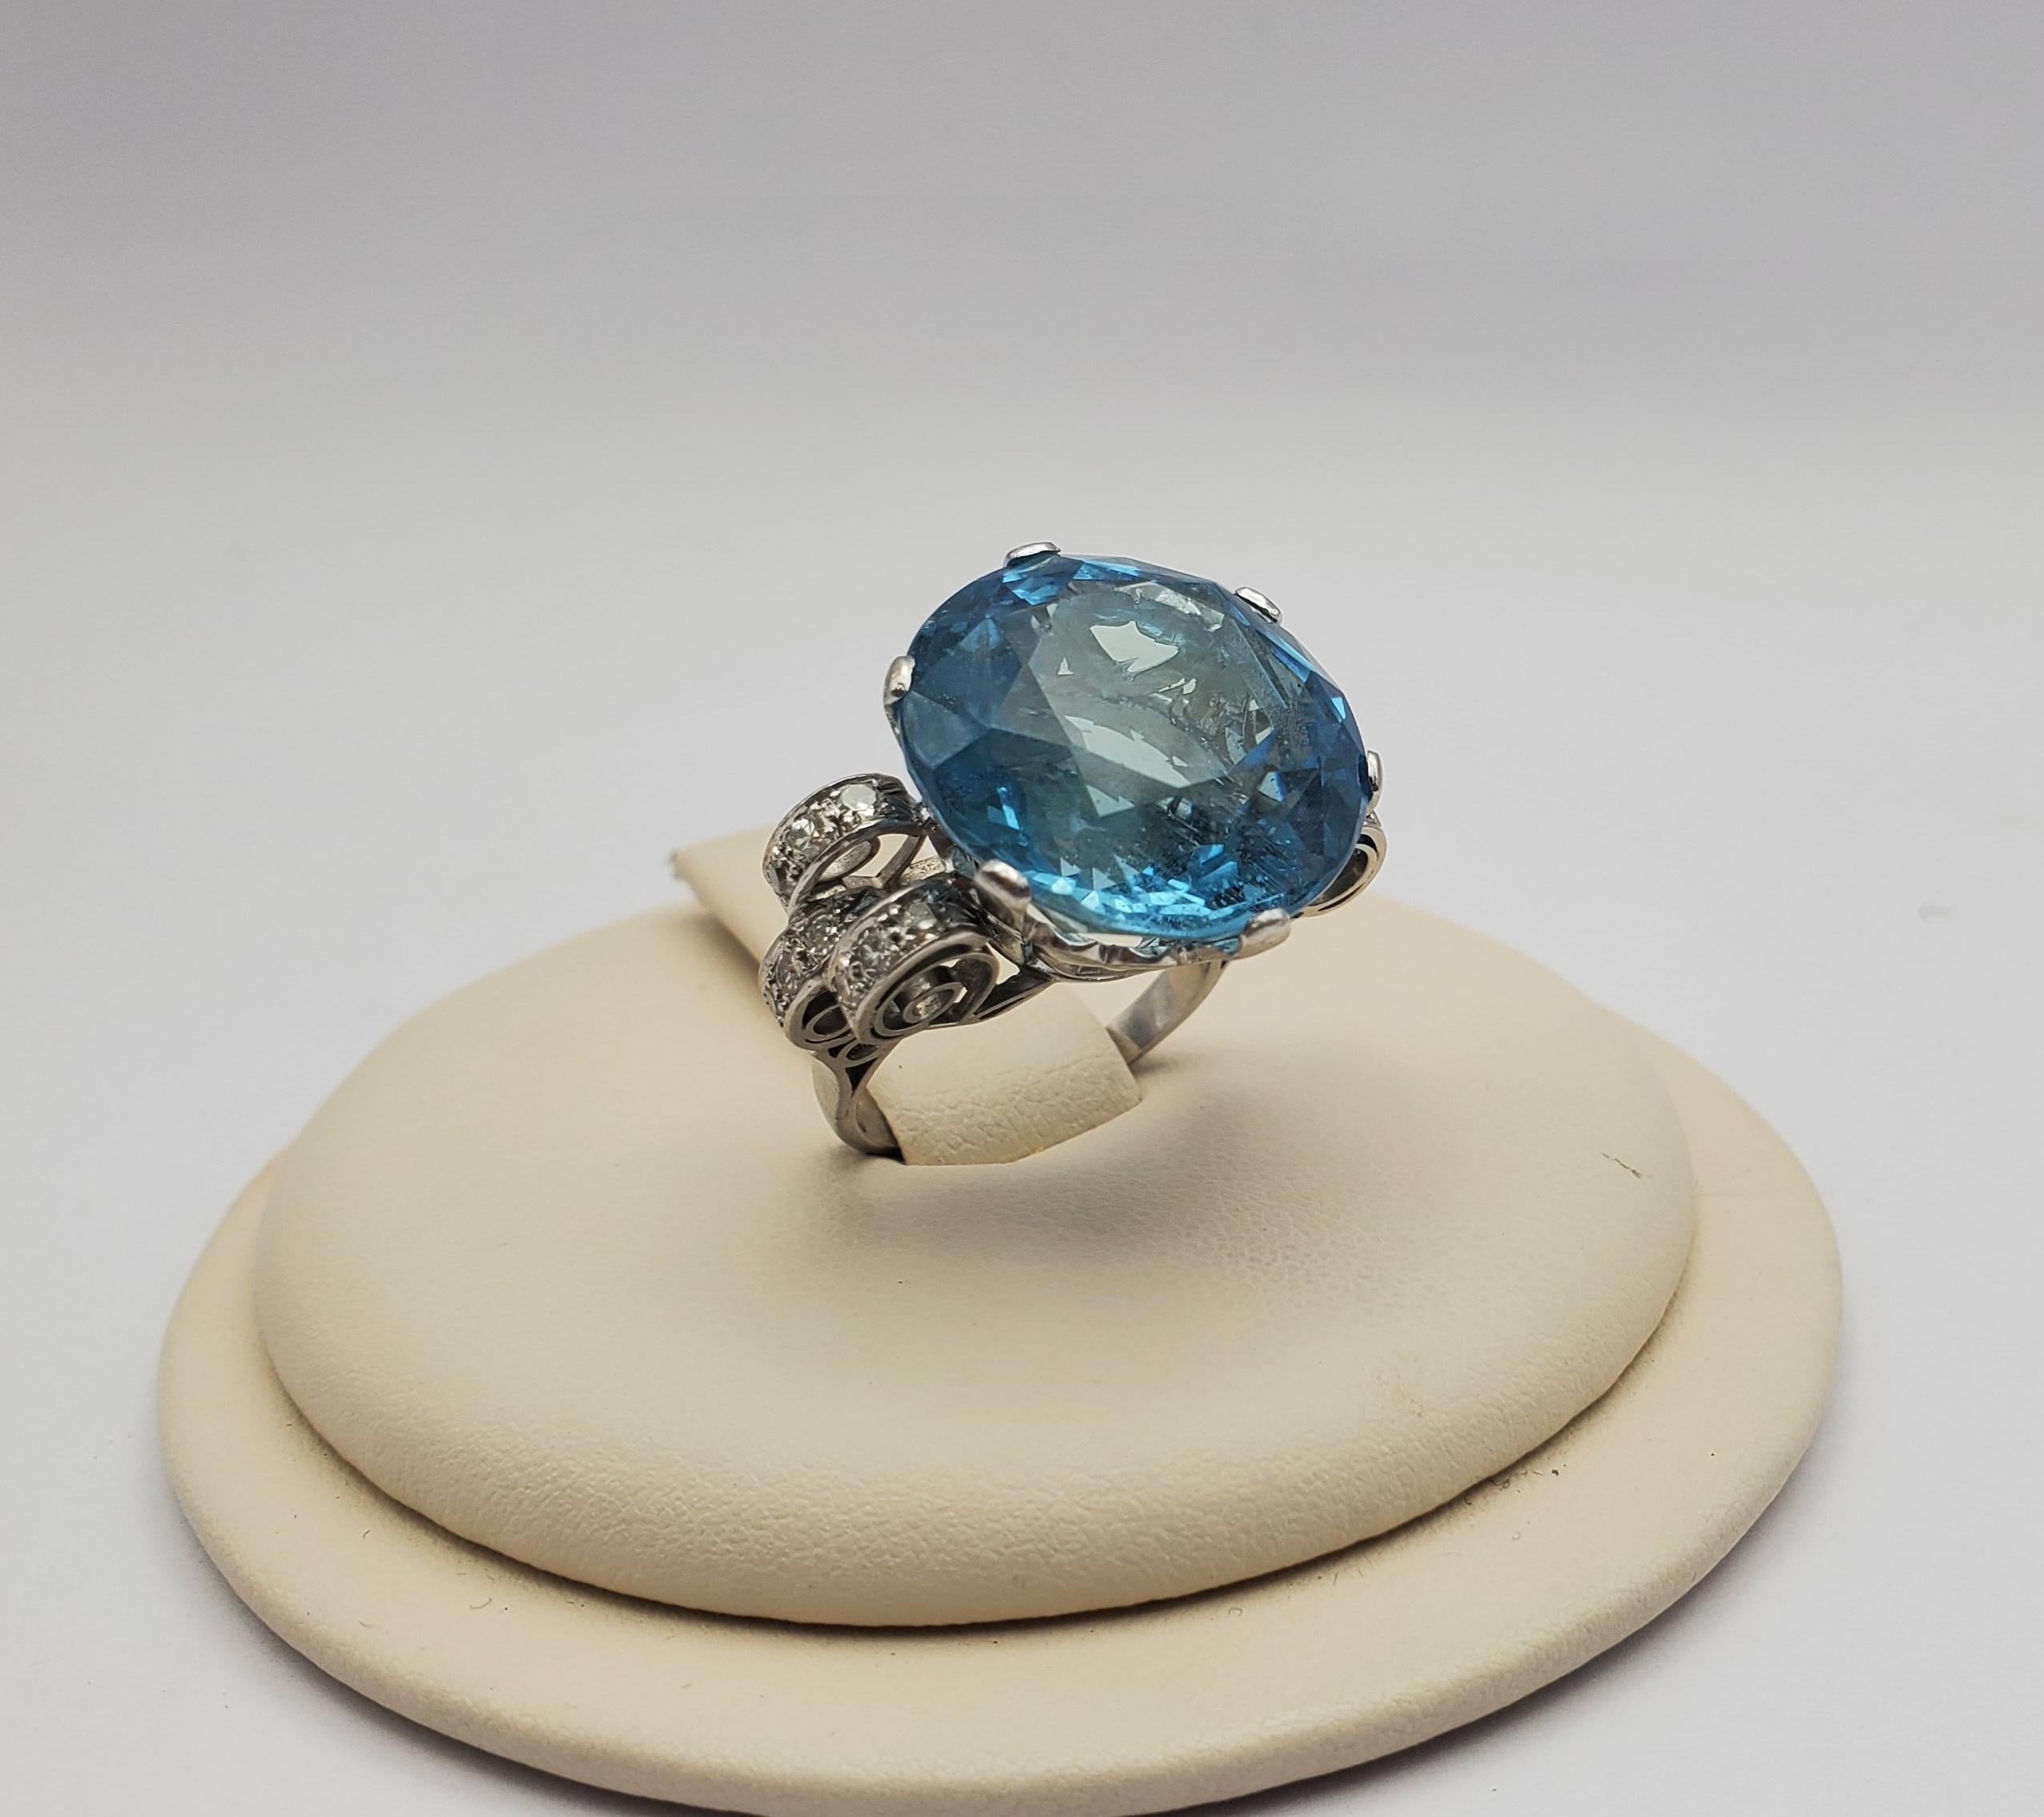 Stunning natural round aquamarine and diamond ring set in platinum. The center stone is a modified round brilliant cut allowing the saturated blue color of the aquamarine to show magnificently. The mounting is set with 0.36ctw of single cut round